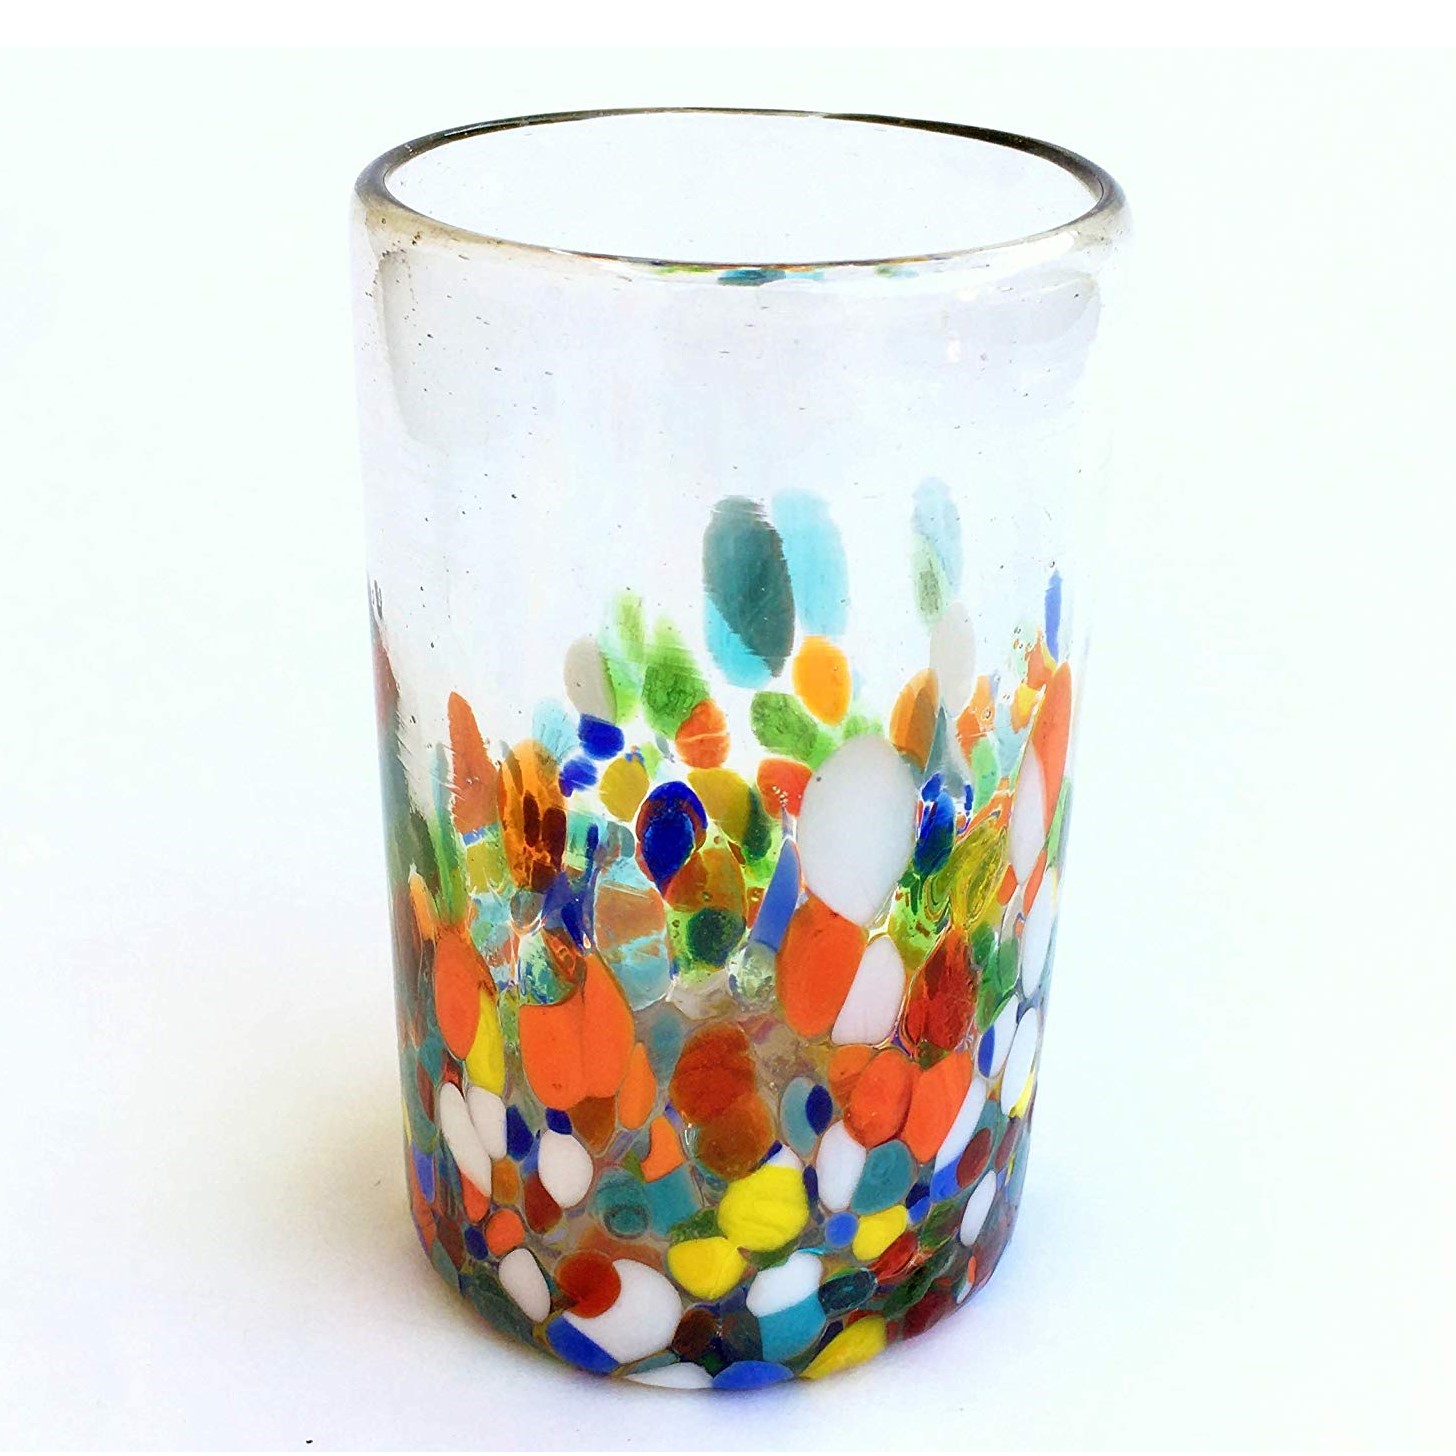 Wholesale Confetti Glassware / Clear & Confetti 14 oz Drinking Glasses  / Our Clear & Confetti drinking glasses combine the best of two worlds: clear, thick, sturdy handcrafted glass on top, meets the colorful, festive, confetti bottom! These glasses will sure be a standout in any table setting or as a fabulous gift for your loved ones. Crafted one by one by skilled artisans in Tonala, Mexico, each glass is different from the next making them unique works of art. You'll be amazed at how they make having a simple glass of water a happier experience. Each glass holds approximately 14 oz of liquid and stands a bit over 5